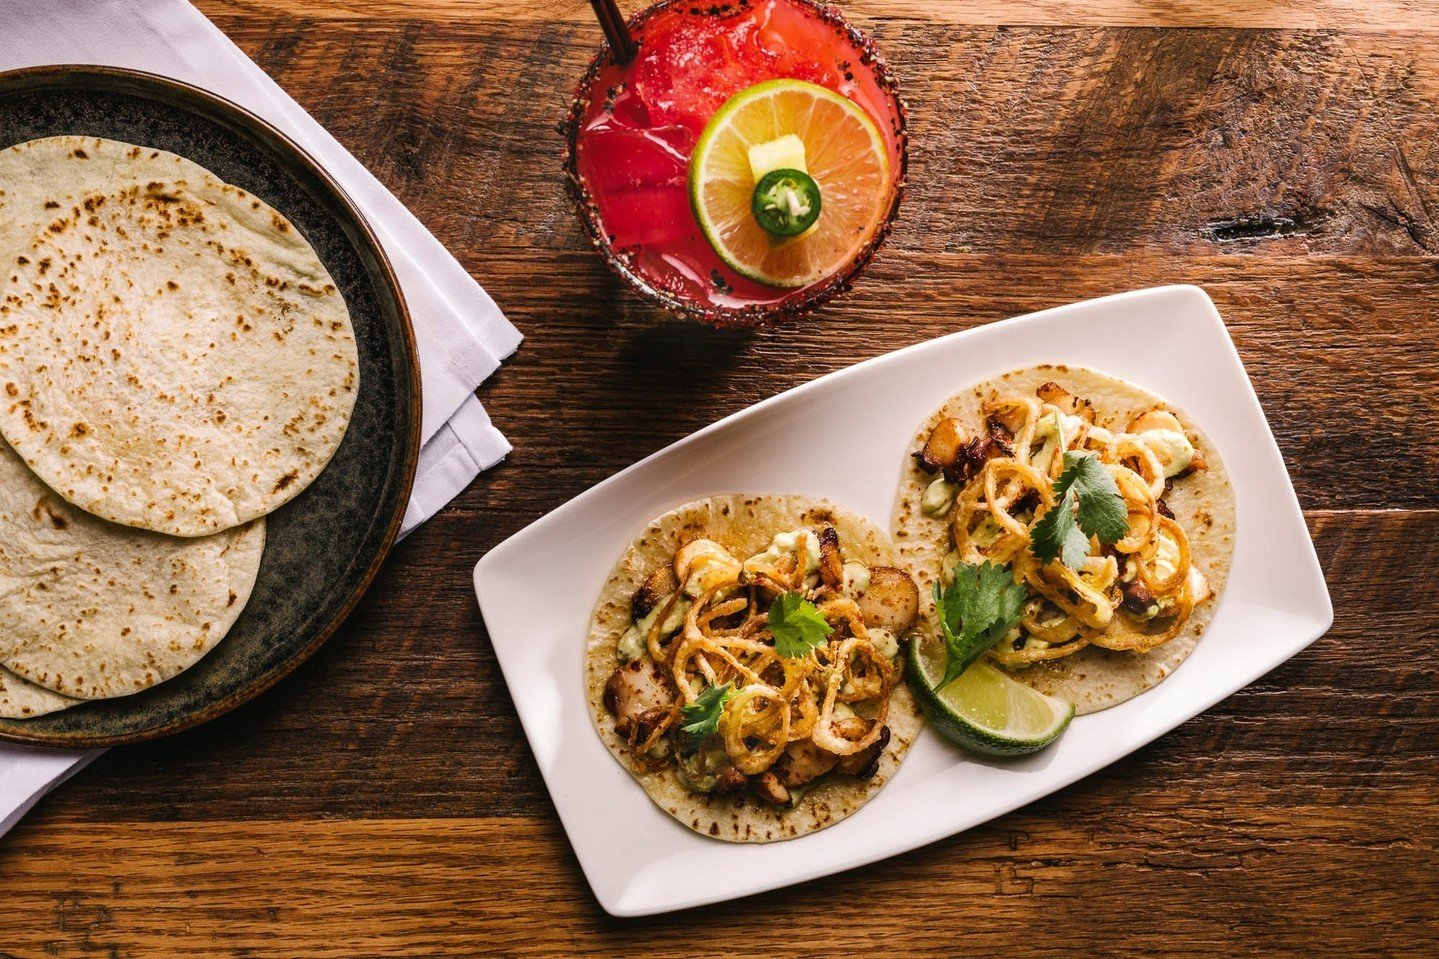 It&rsquo;s #cincodemayo, which is the perfect excuse to head to a local spot like @lolitateqbars, order tacos and margaritas (my personal favorites), and let the Sunday scaries melt away.